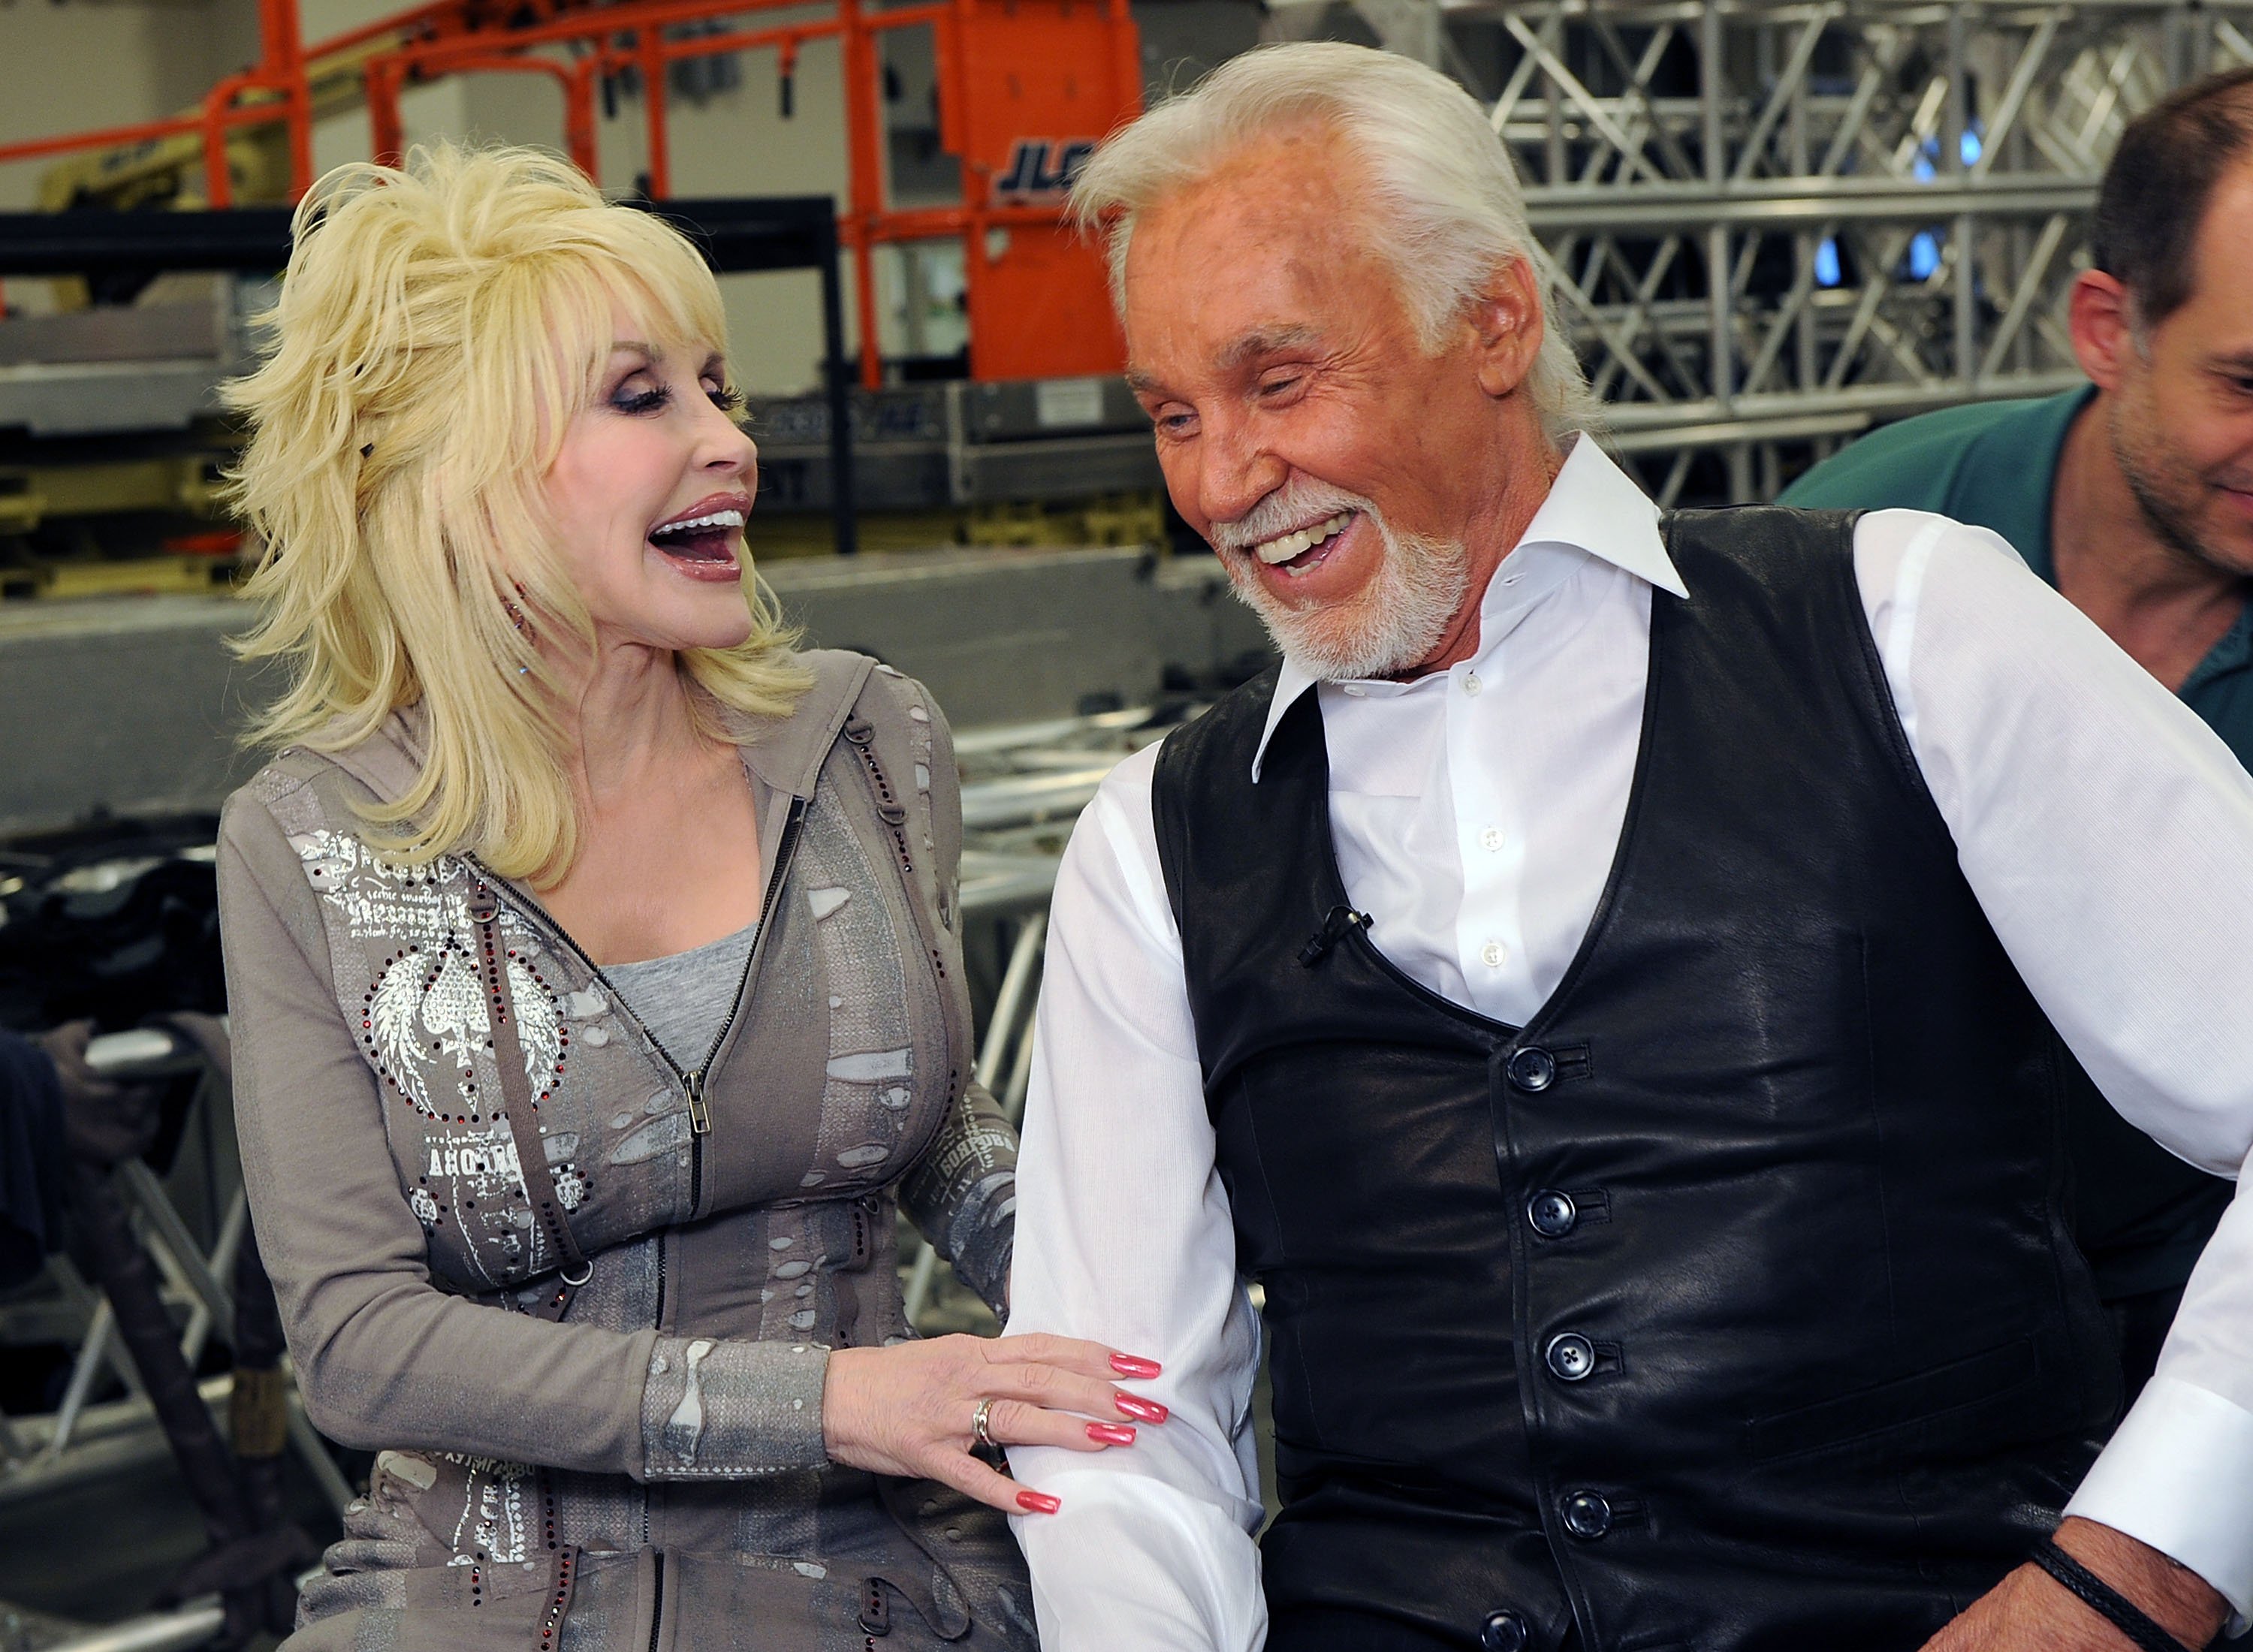 Dolly Parton and Honoree Kenny Rogers Backstage at the Kenny Rogers: The First 50 Years show at the MGM Grand at Foxwoods on April 10, 2010 | Photo: Getty Images